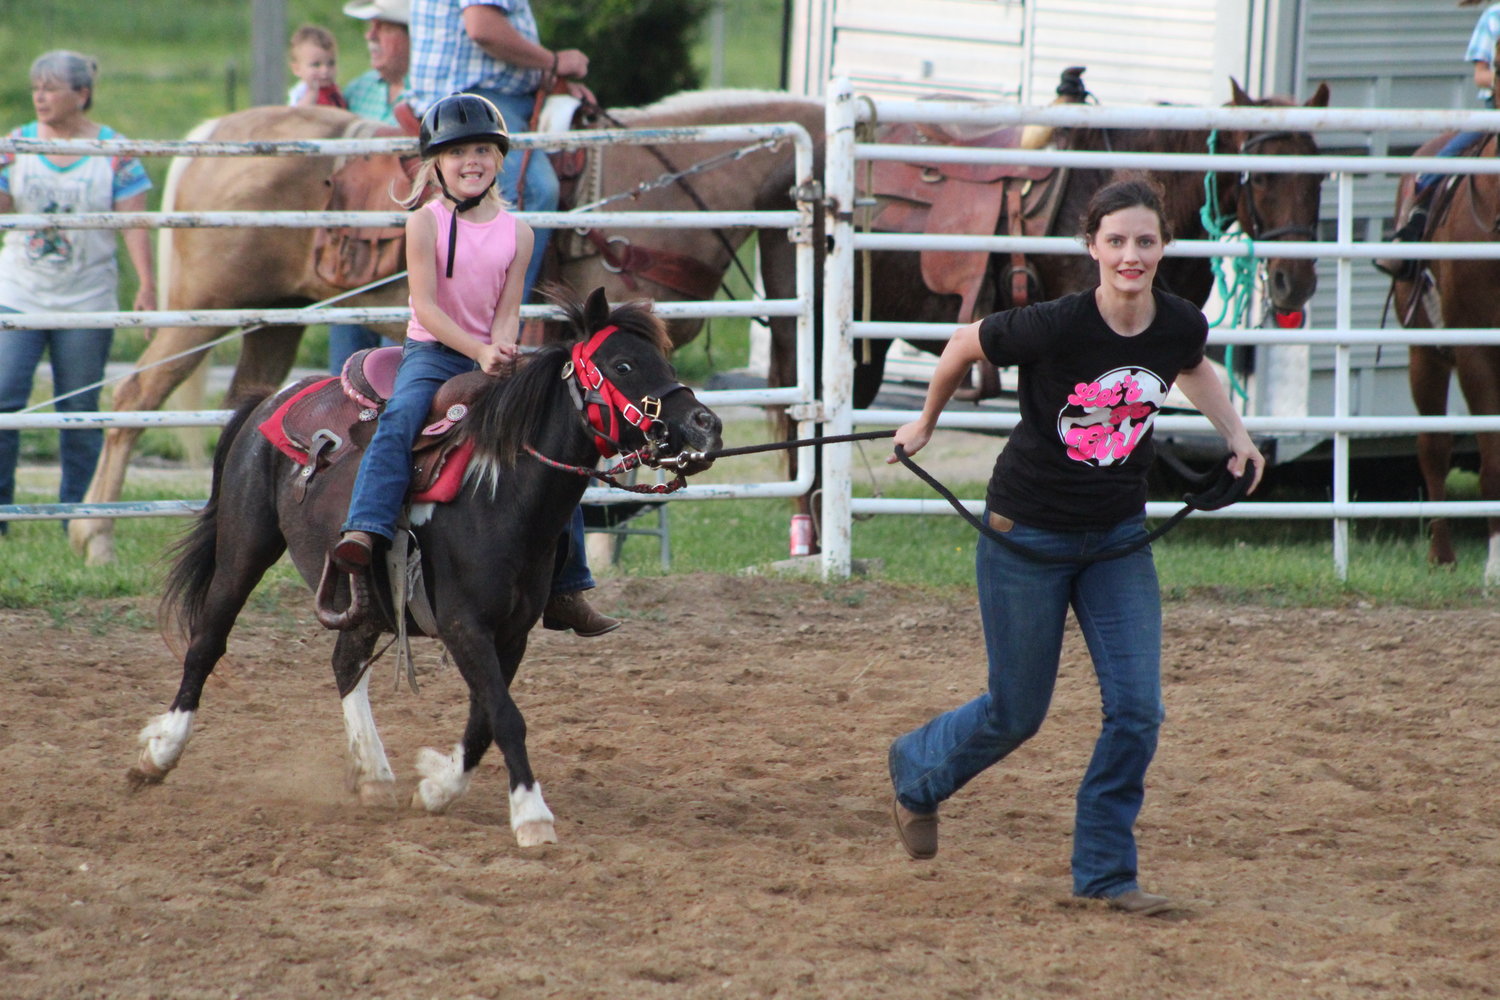 Fun in the neighhh-borhood! Brystol, Coco, and Brittney Lawless are all smile during the down and back run.